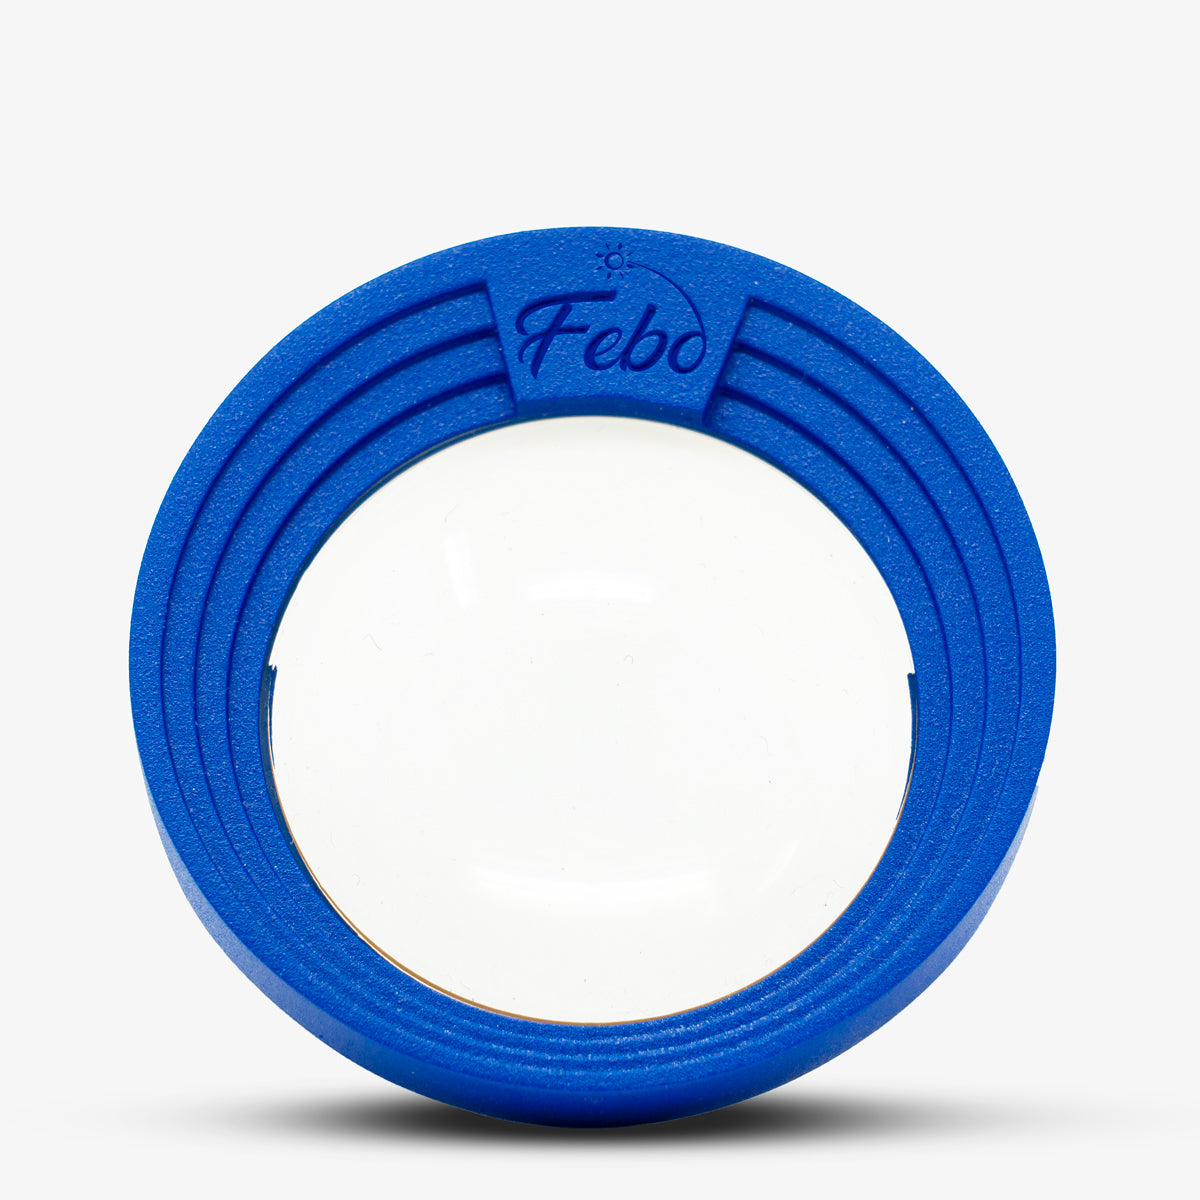 Febo blue front view